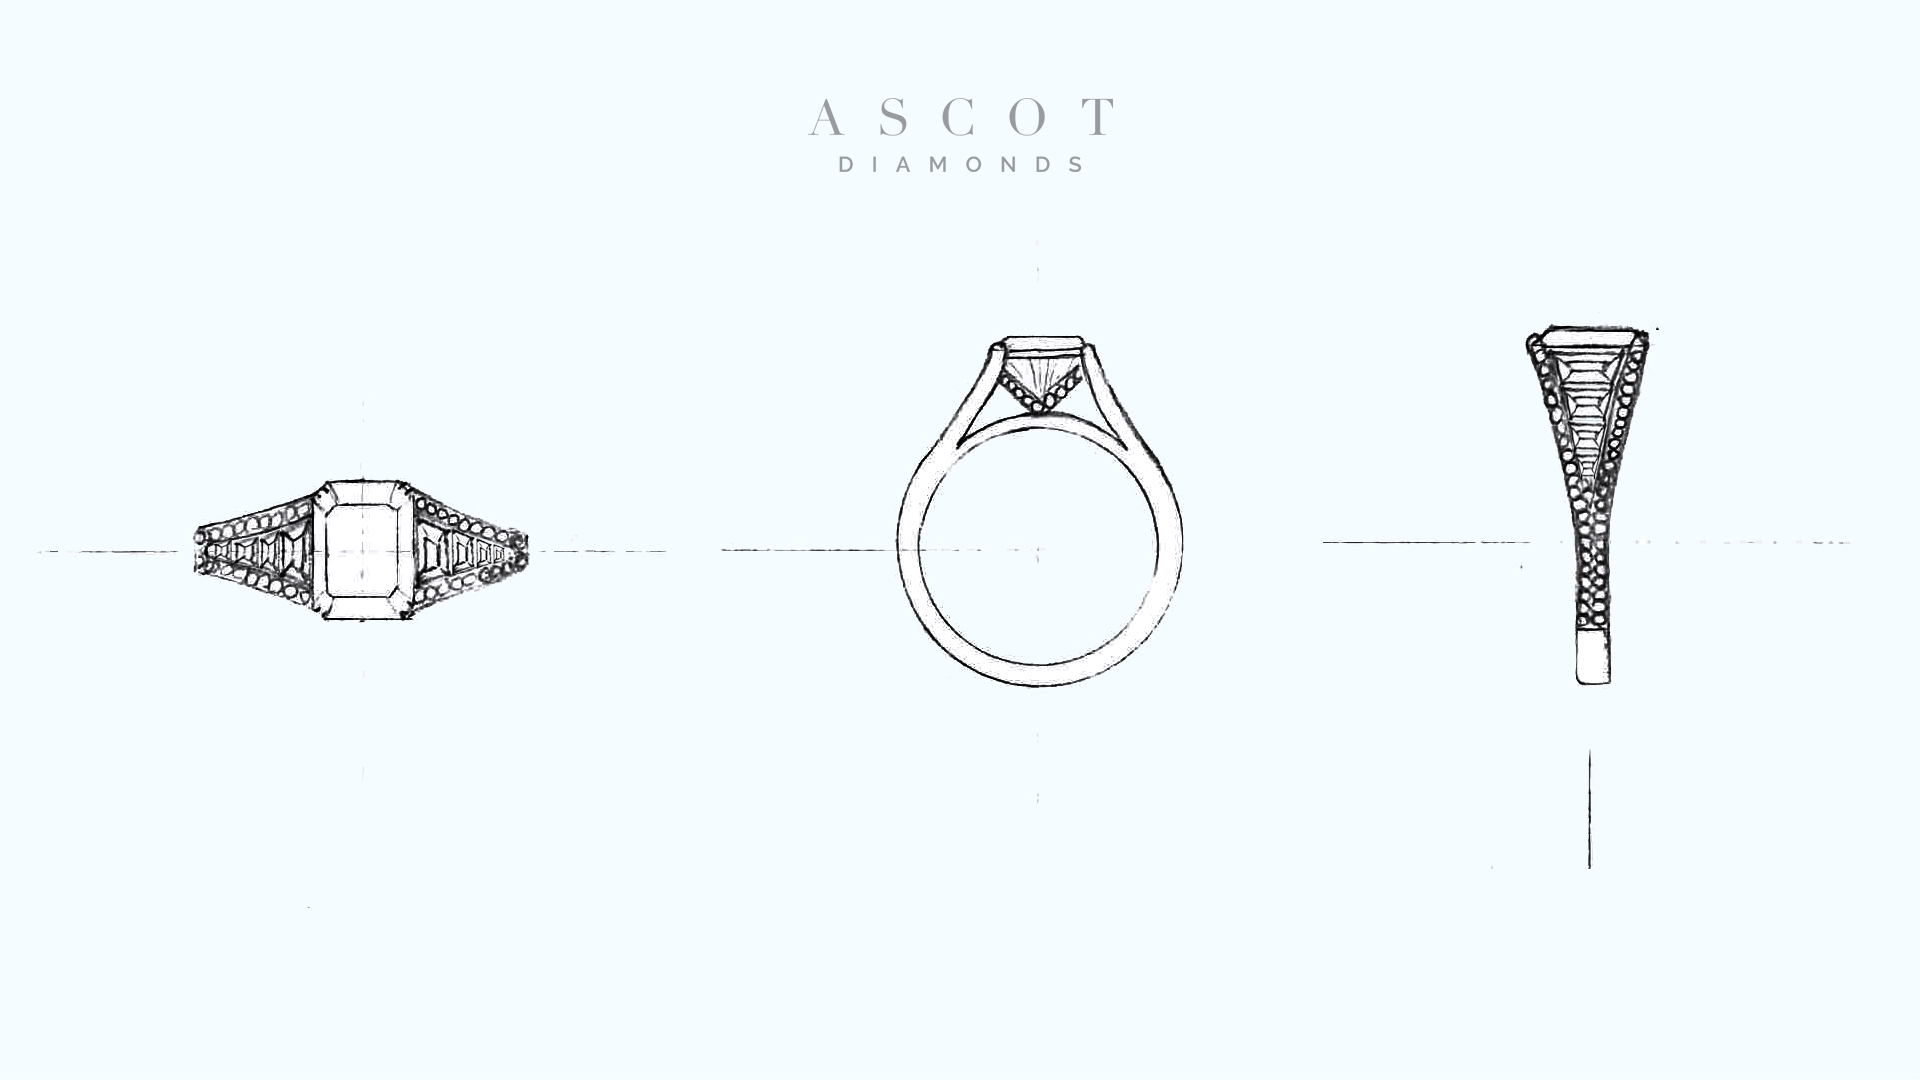 How to Draw a Simple Ring Designs, Step by Step pencil drawing by art  jewellery design. - YouTube